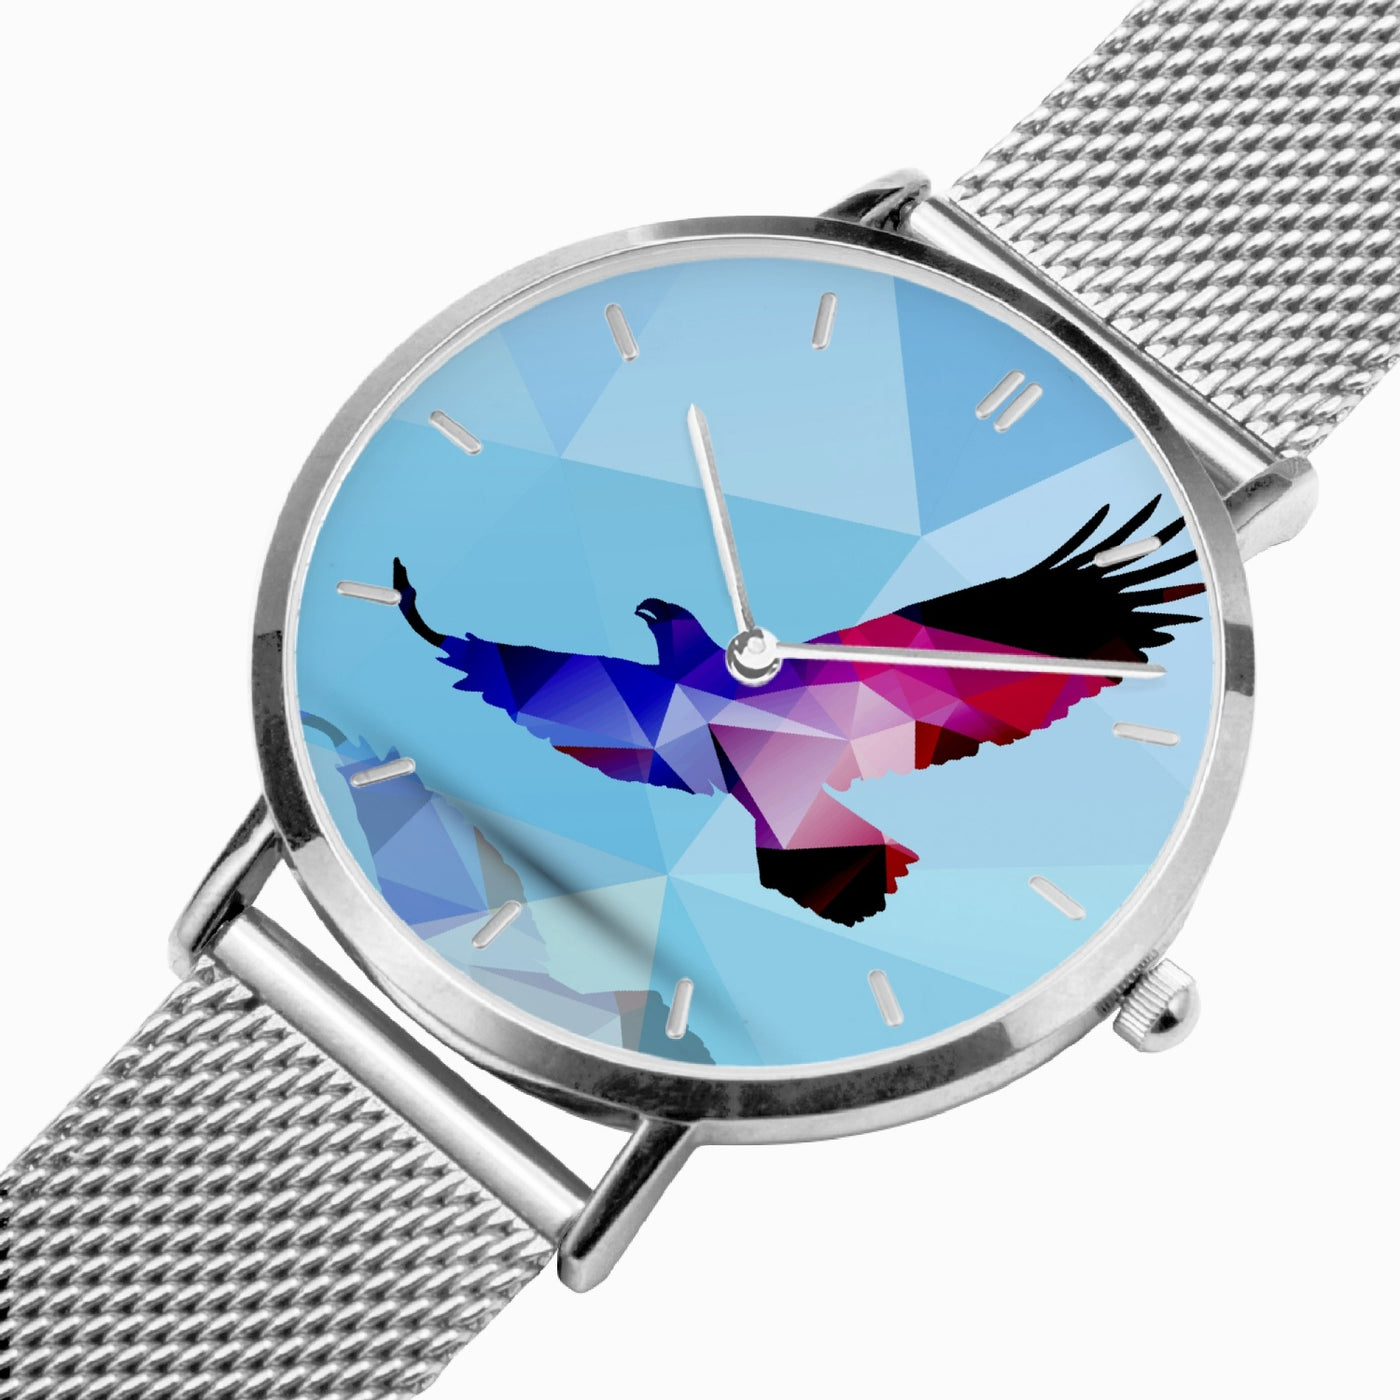 Flying High - Fashion Ultra-thin Stainless Steel Quartz Watch (With Indicators)